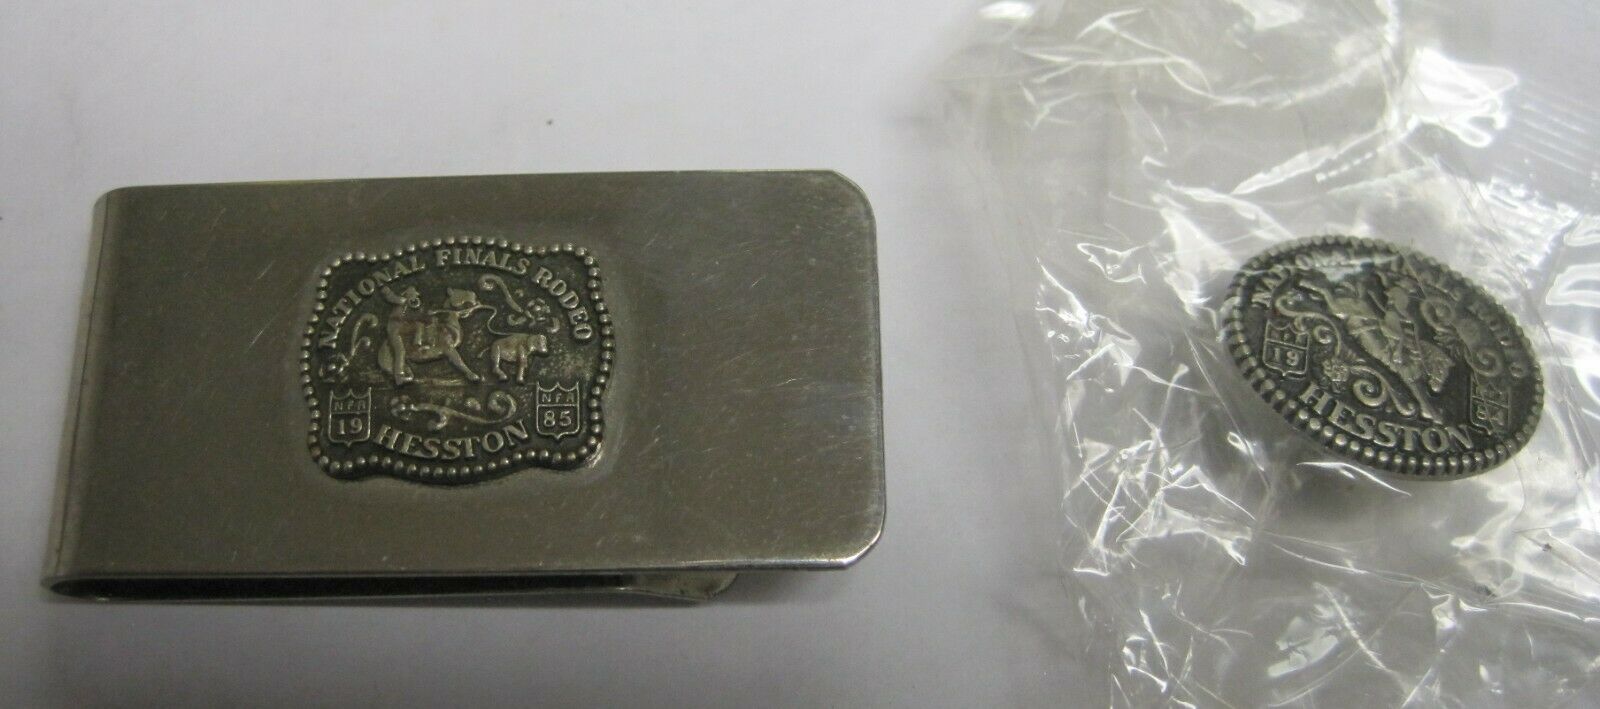 National Finals Rodeo Hesston 1985 Money Clip & 1984 Hat Pin, Vintage